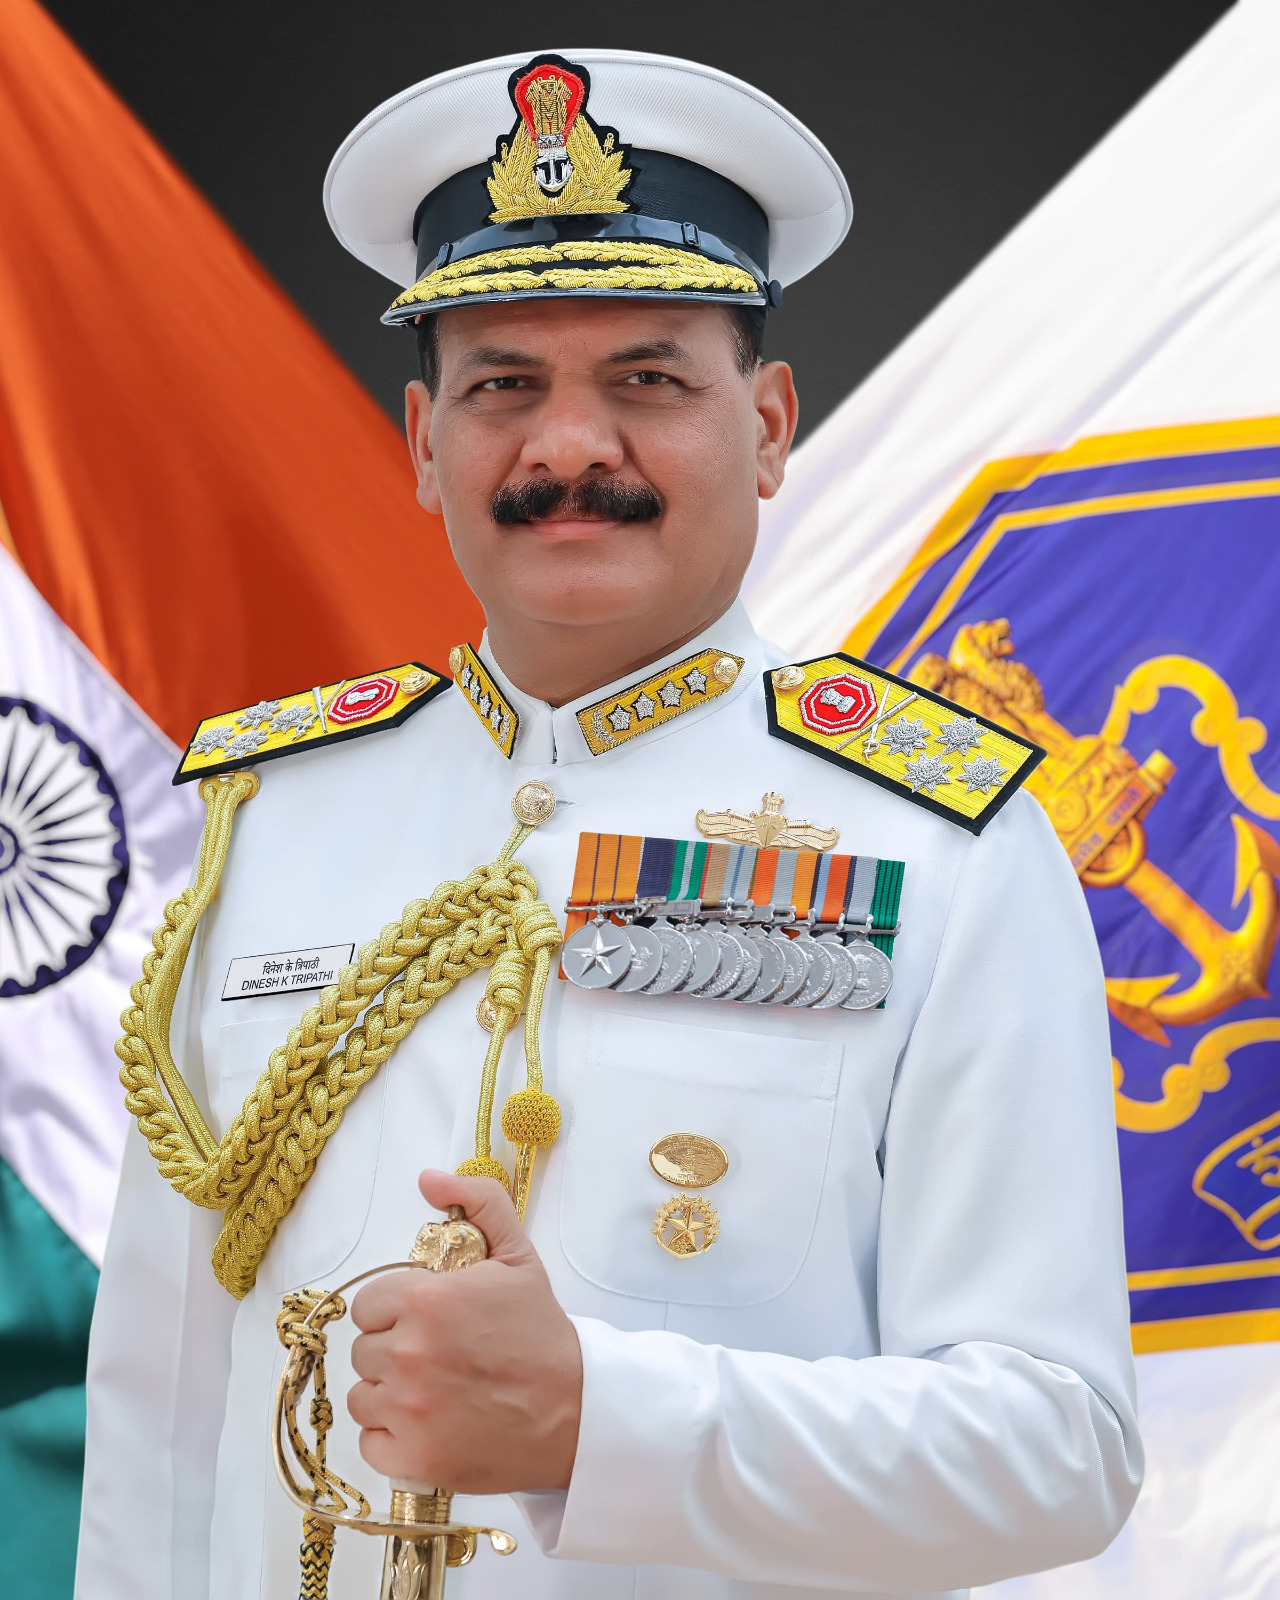 ADMIRAL DINESH K TRIPATHI PVSM, AVSM, NM ASSUMES COMMAND OF THE INDIAN NAVY AS 26th CHIEF OF THE NAVAL STAFF